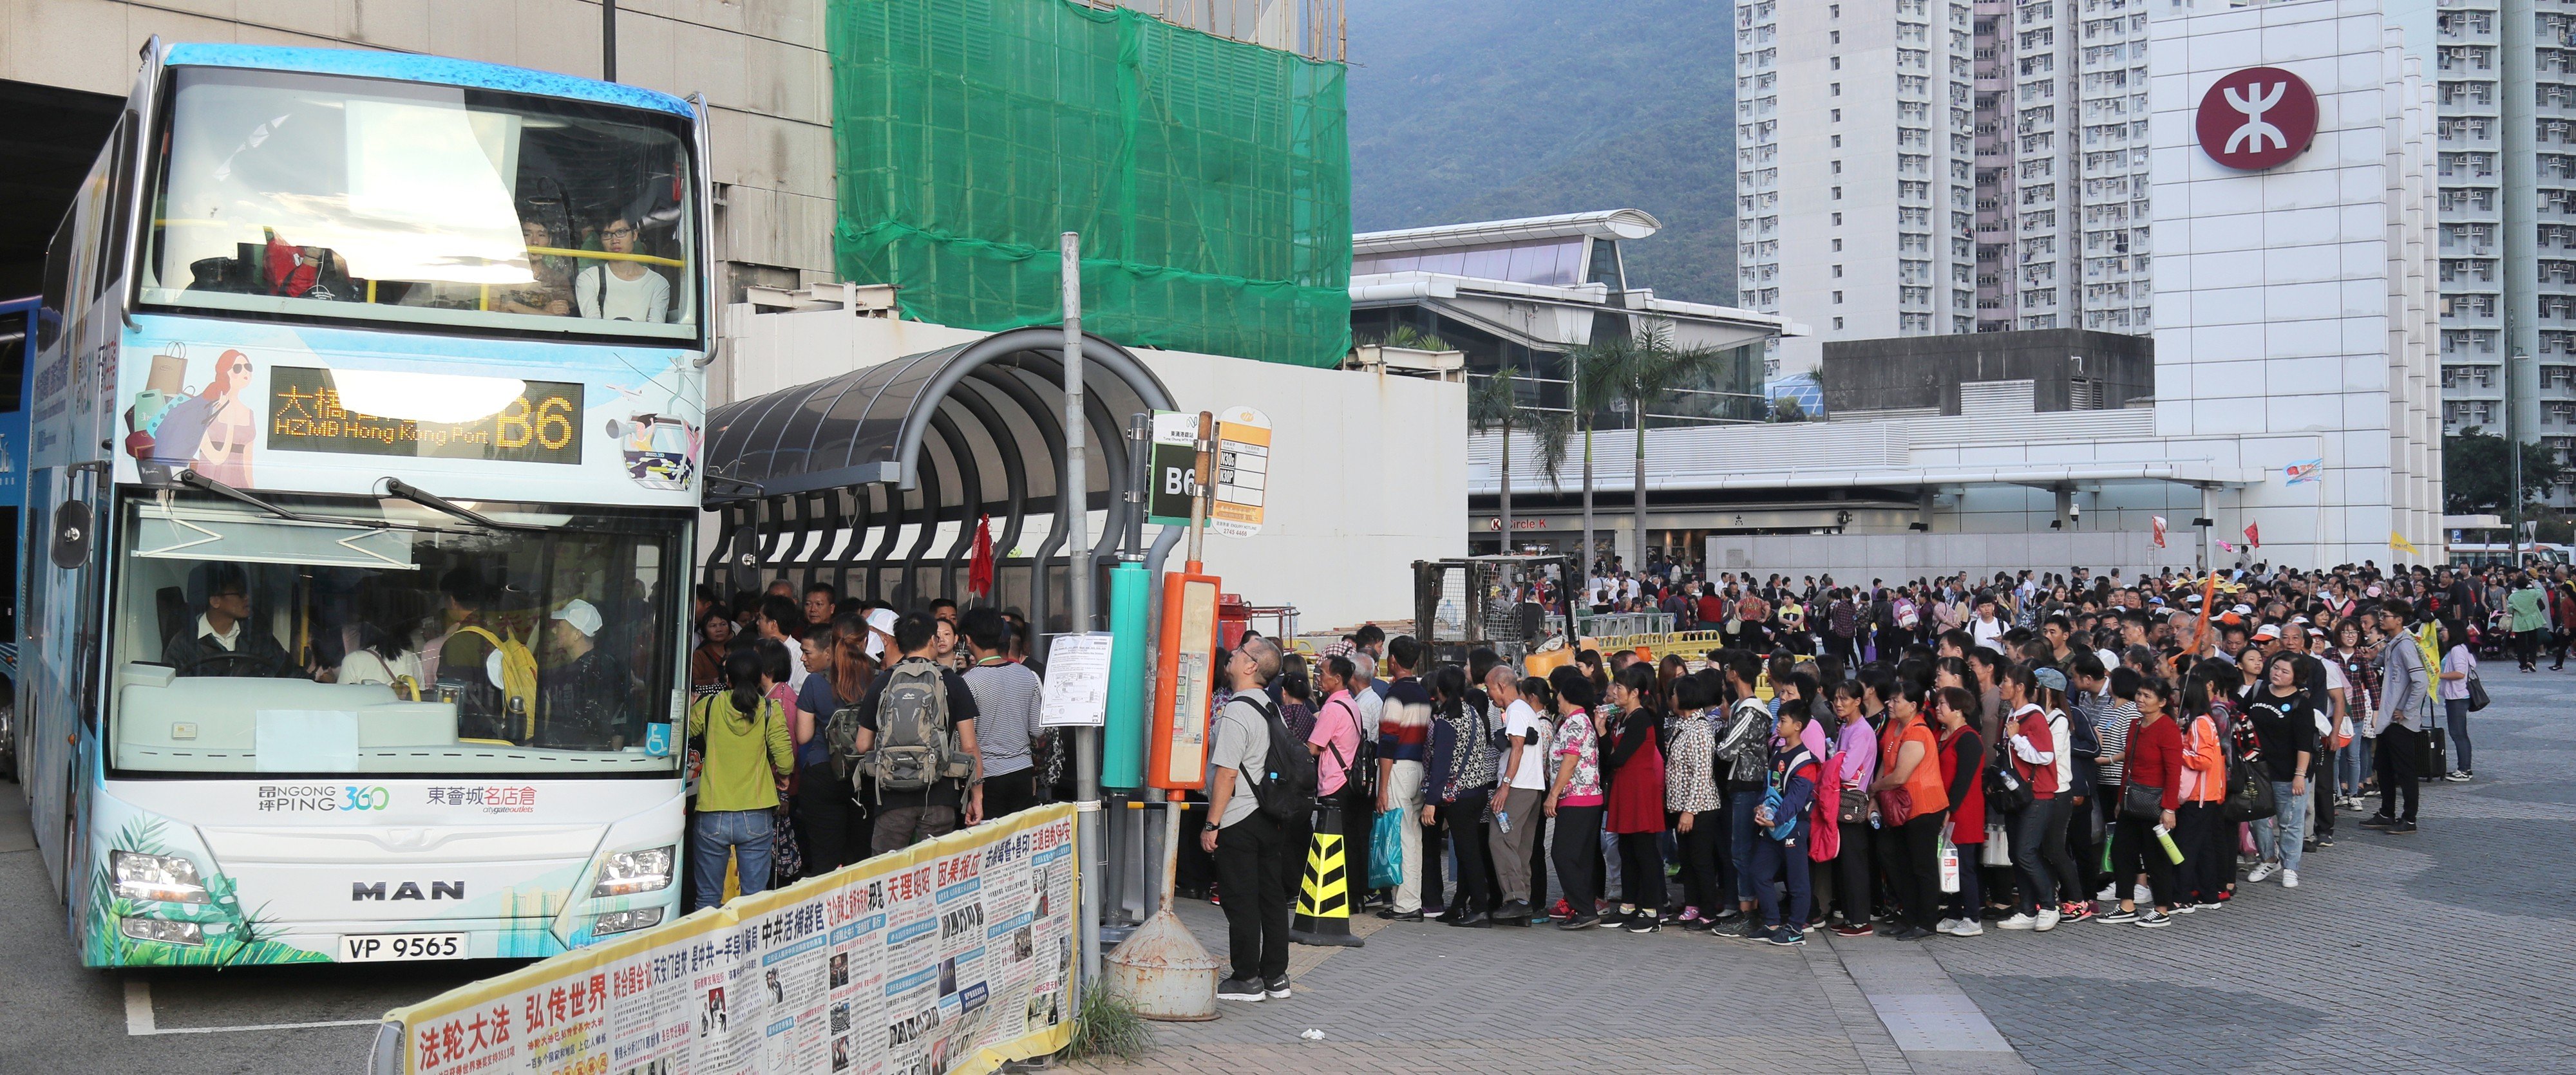 Mainland tourists wait for the bus at Tung Chung MTR station. Photo: SCMP Pictures